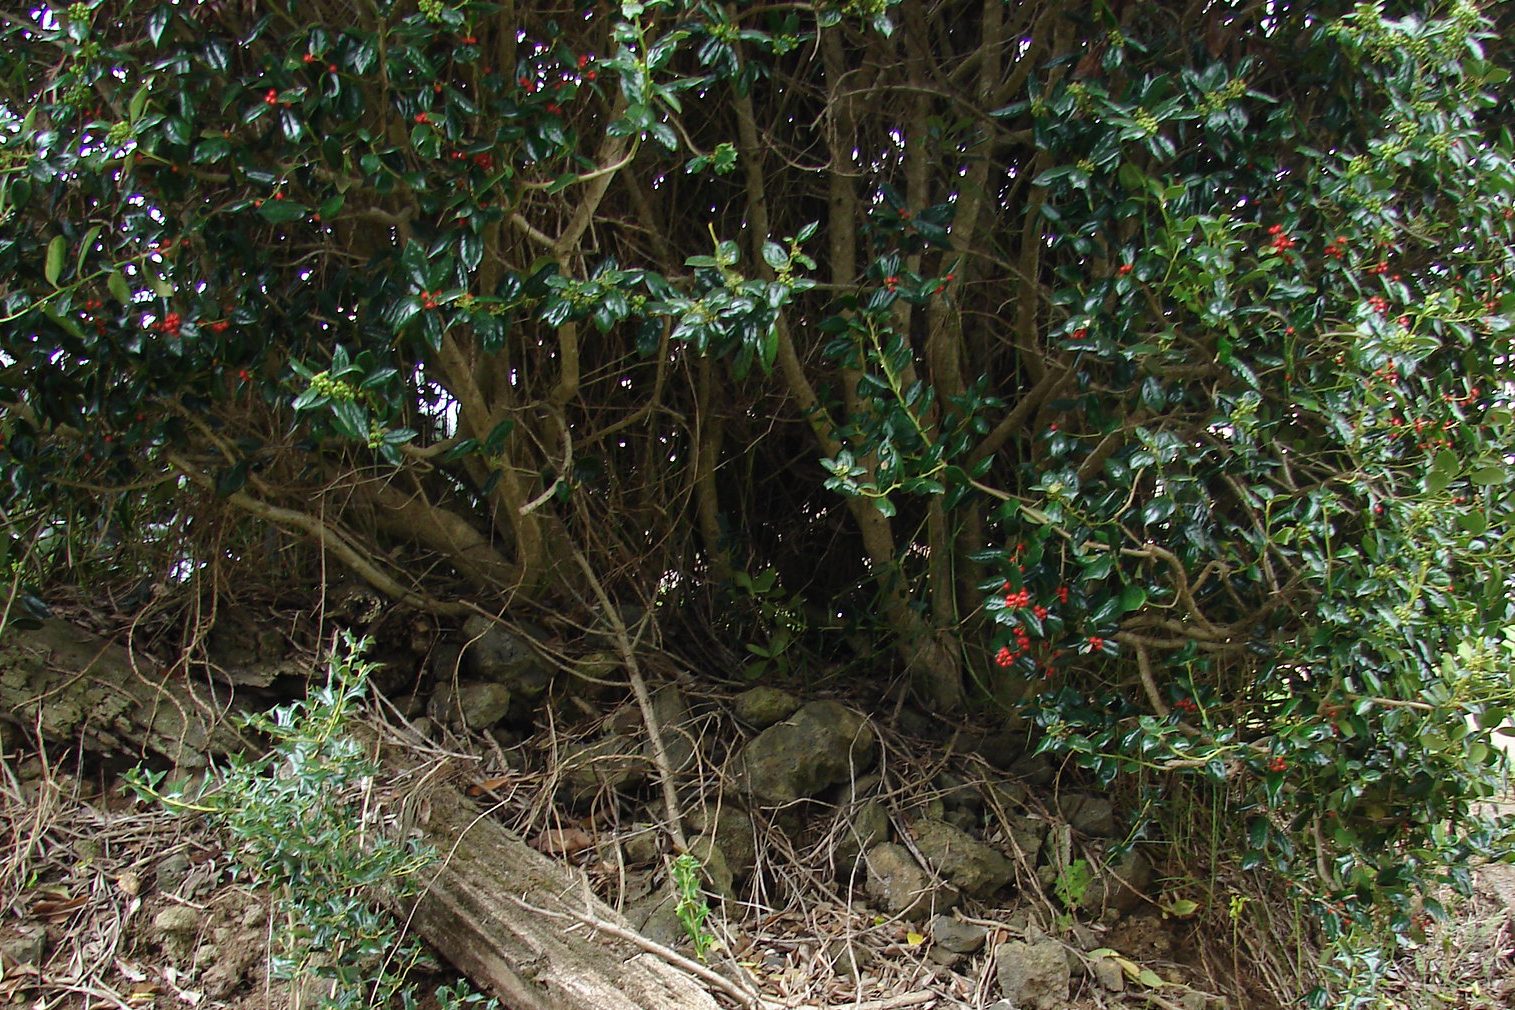 A tangle of Holly trunks and branches